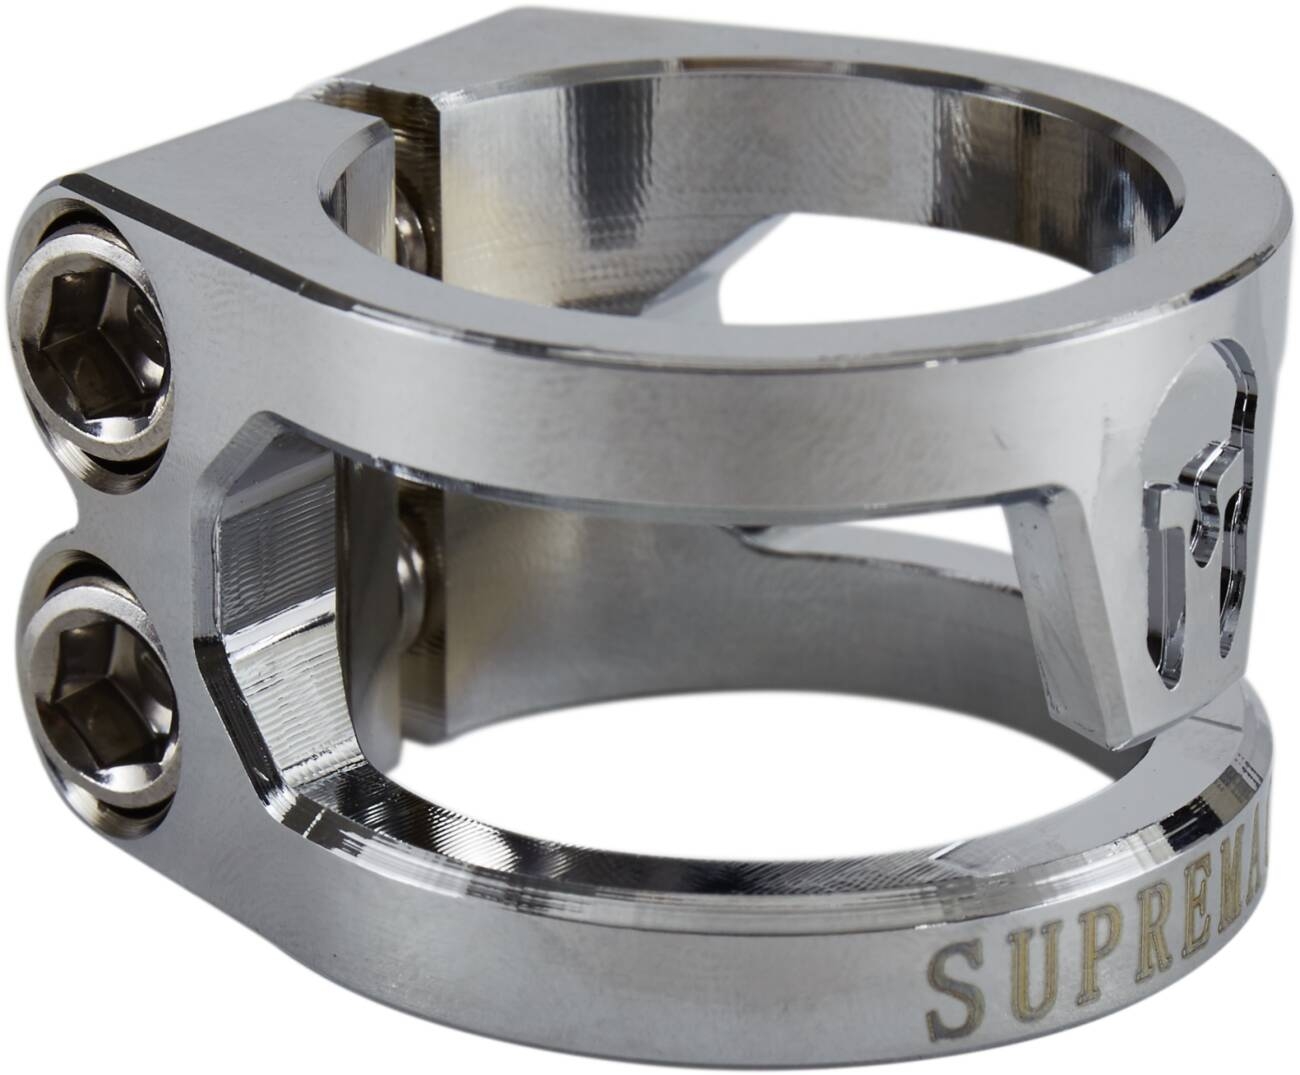 An image of Supremacy Spartan Double Clamp - Chrome